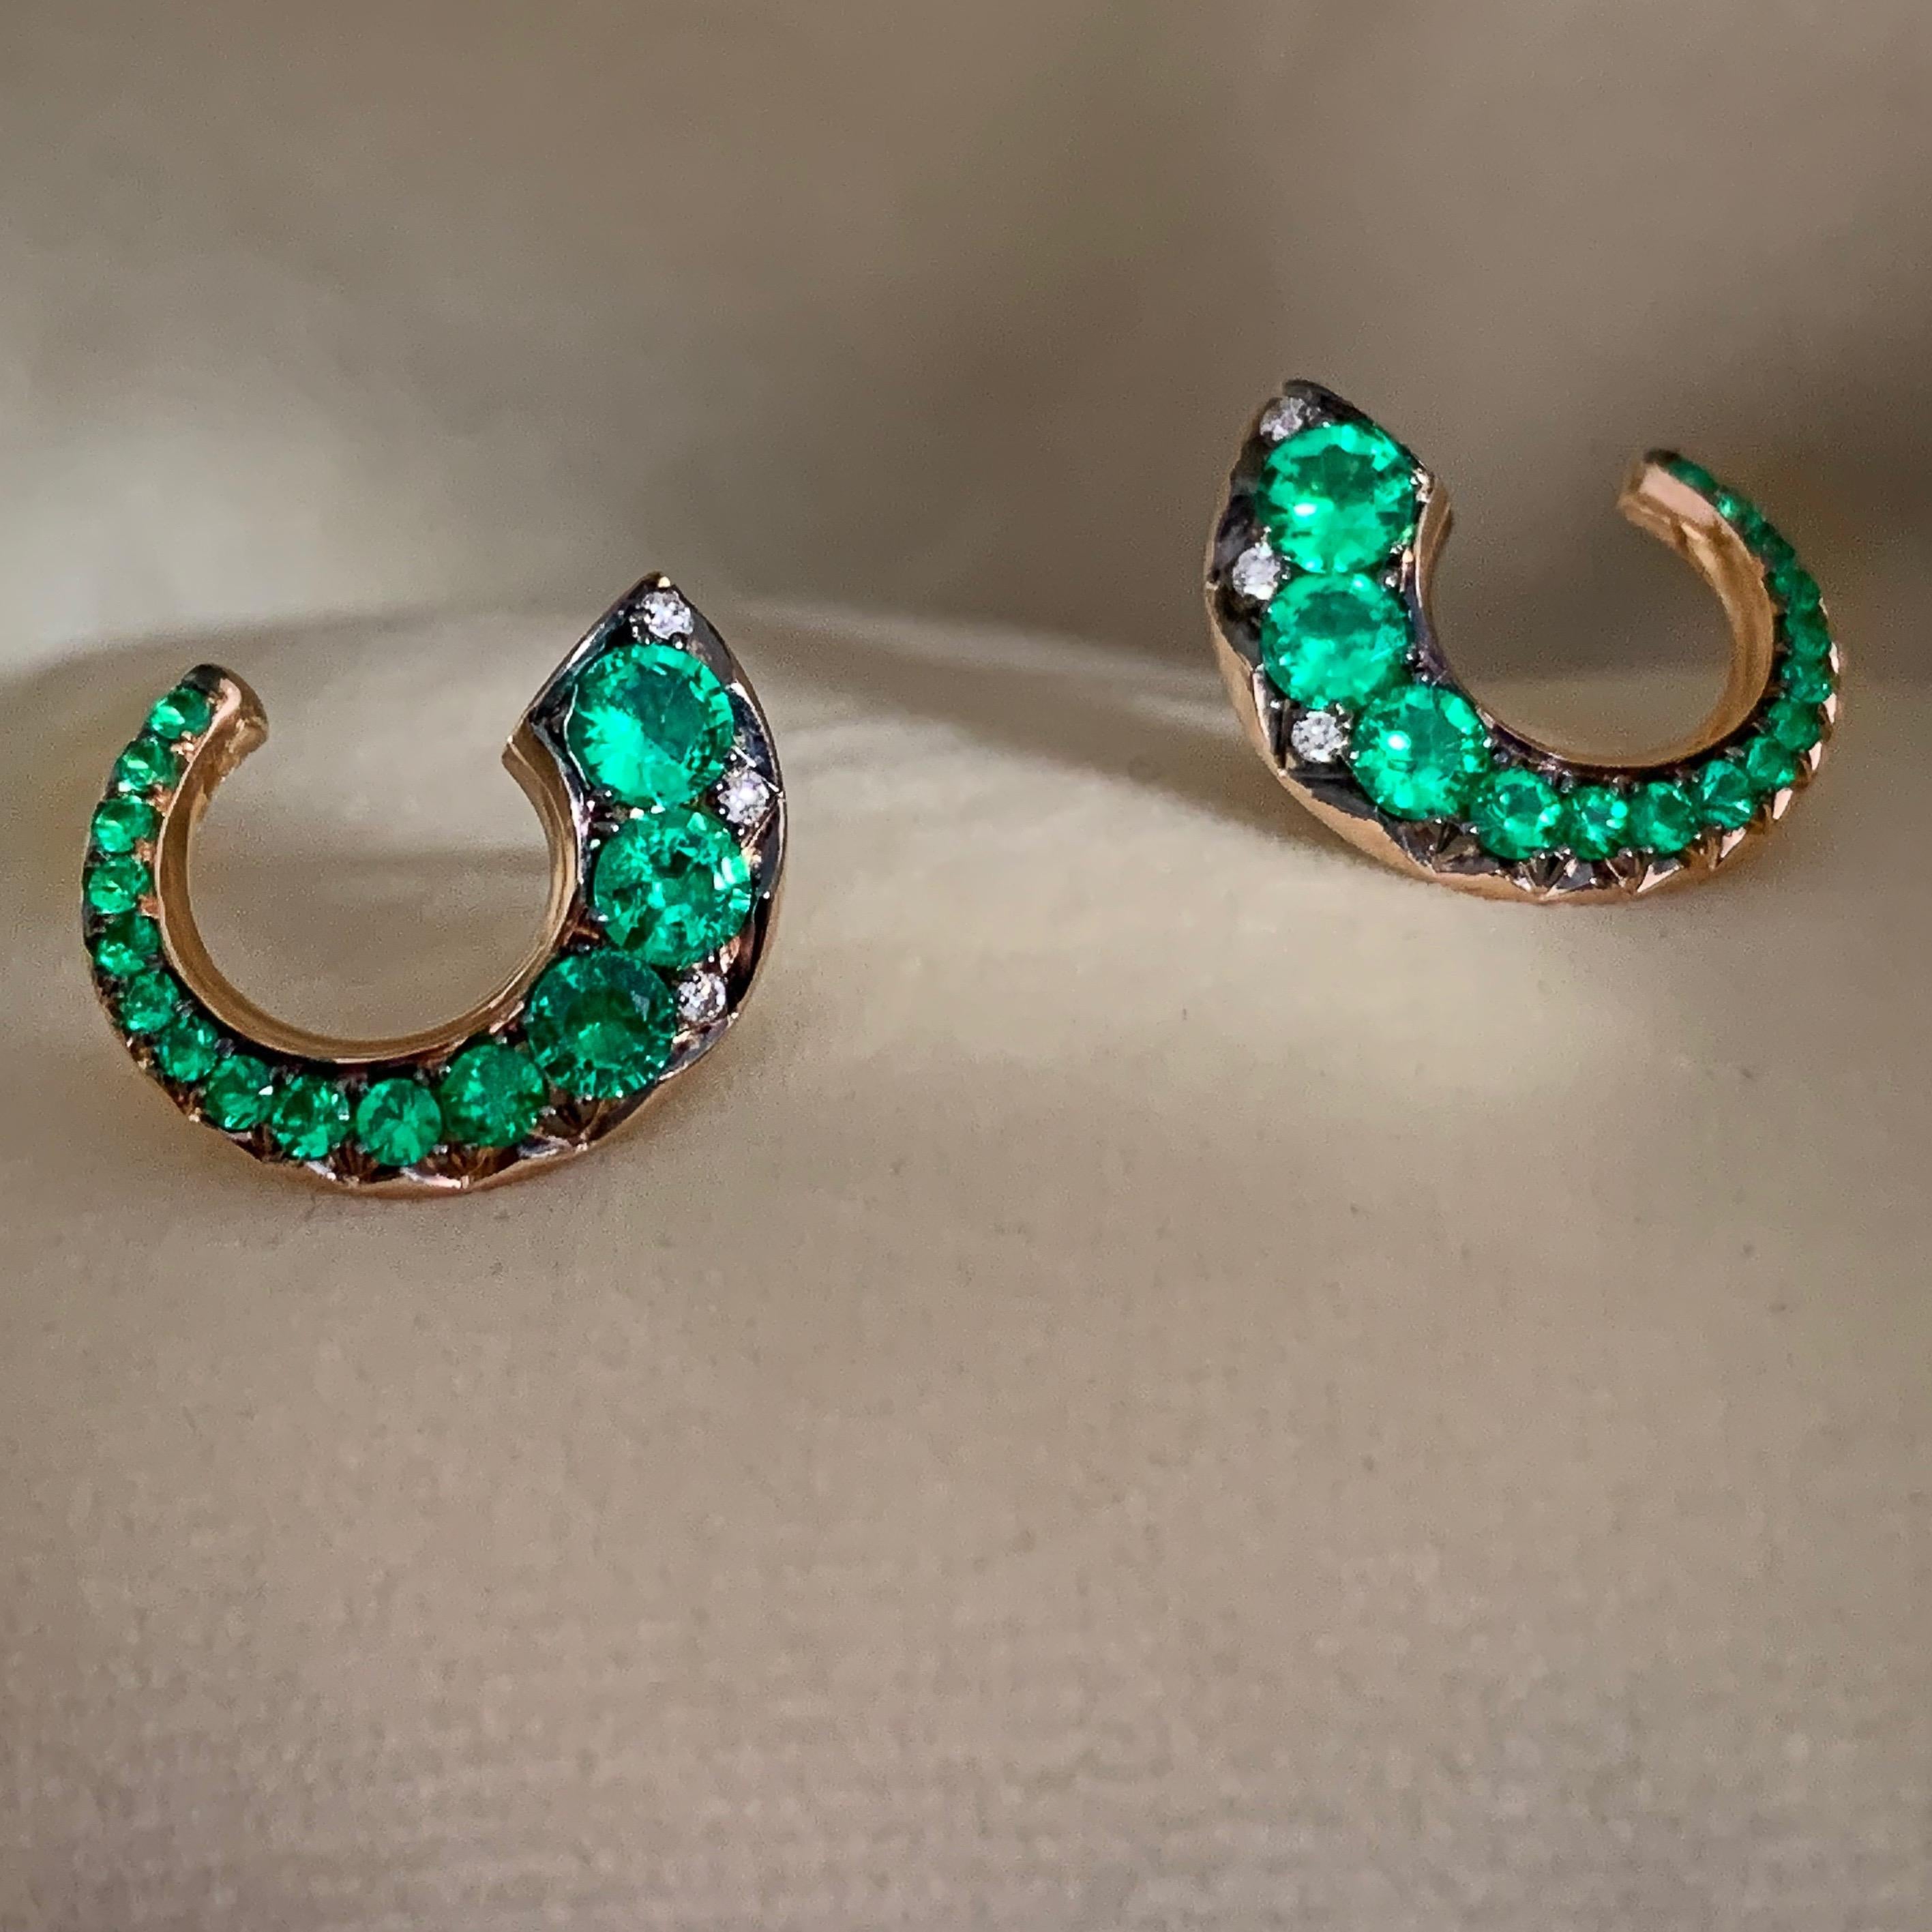 Flat Hoop Earrings in 18K Rose gold 3,4 g. Pave set with intense green Columbian Emeralds 0,94 ct. ( no resin only oil), White DEGVVS brilliant-cut diamonds 0,045 ct. 
This exquisite product comes from Joke Quick, a jewellery designer and master of